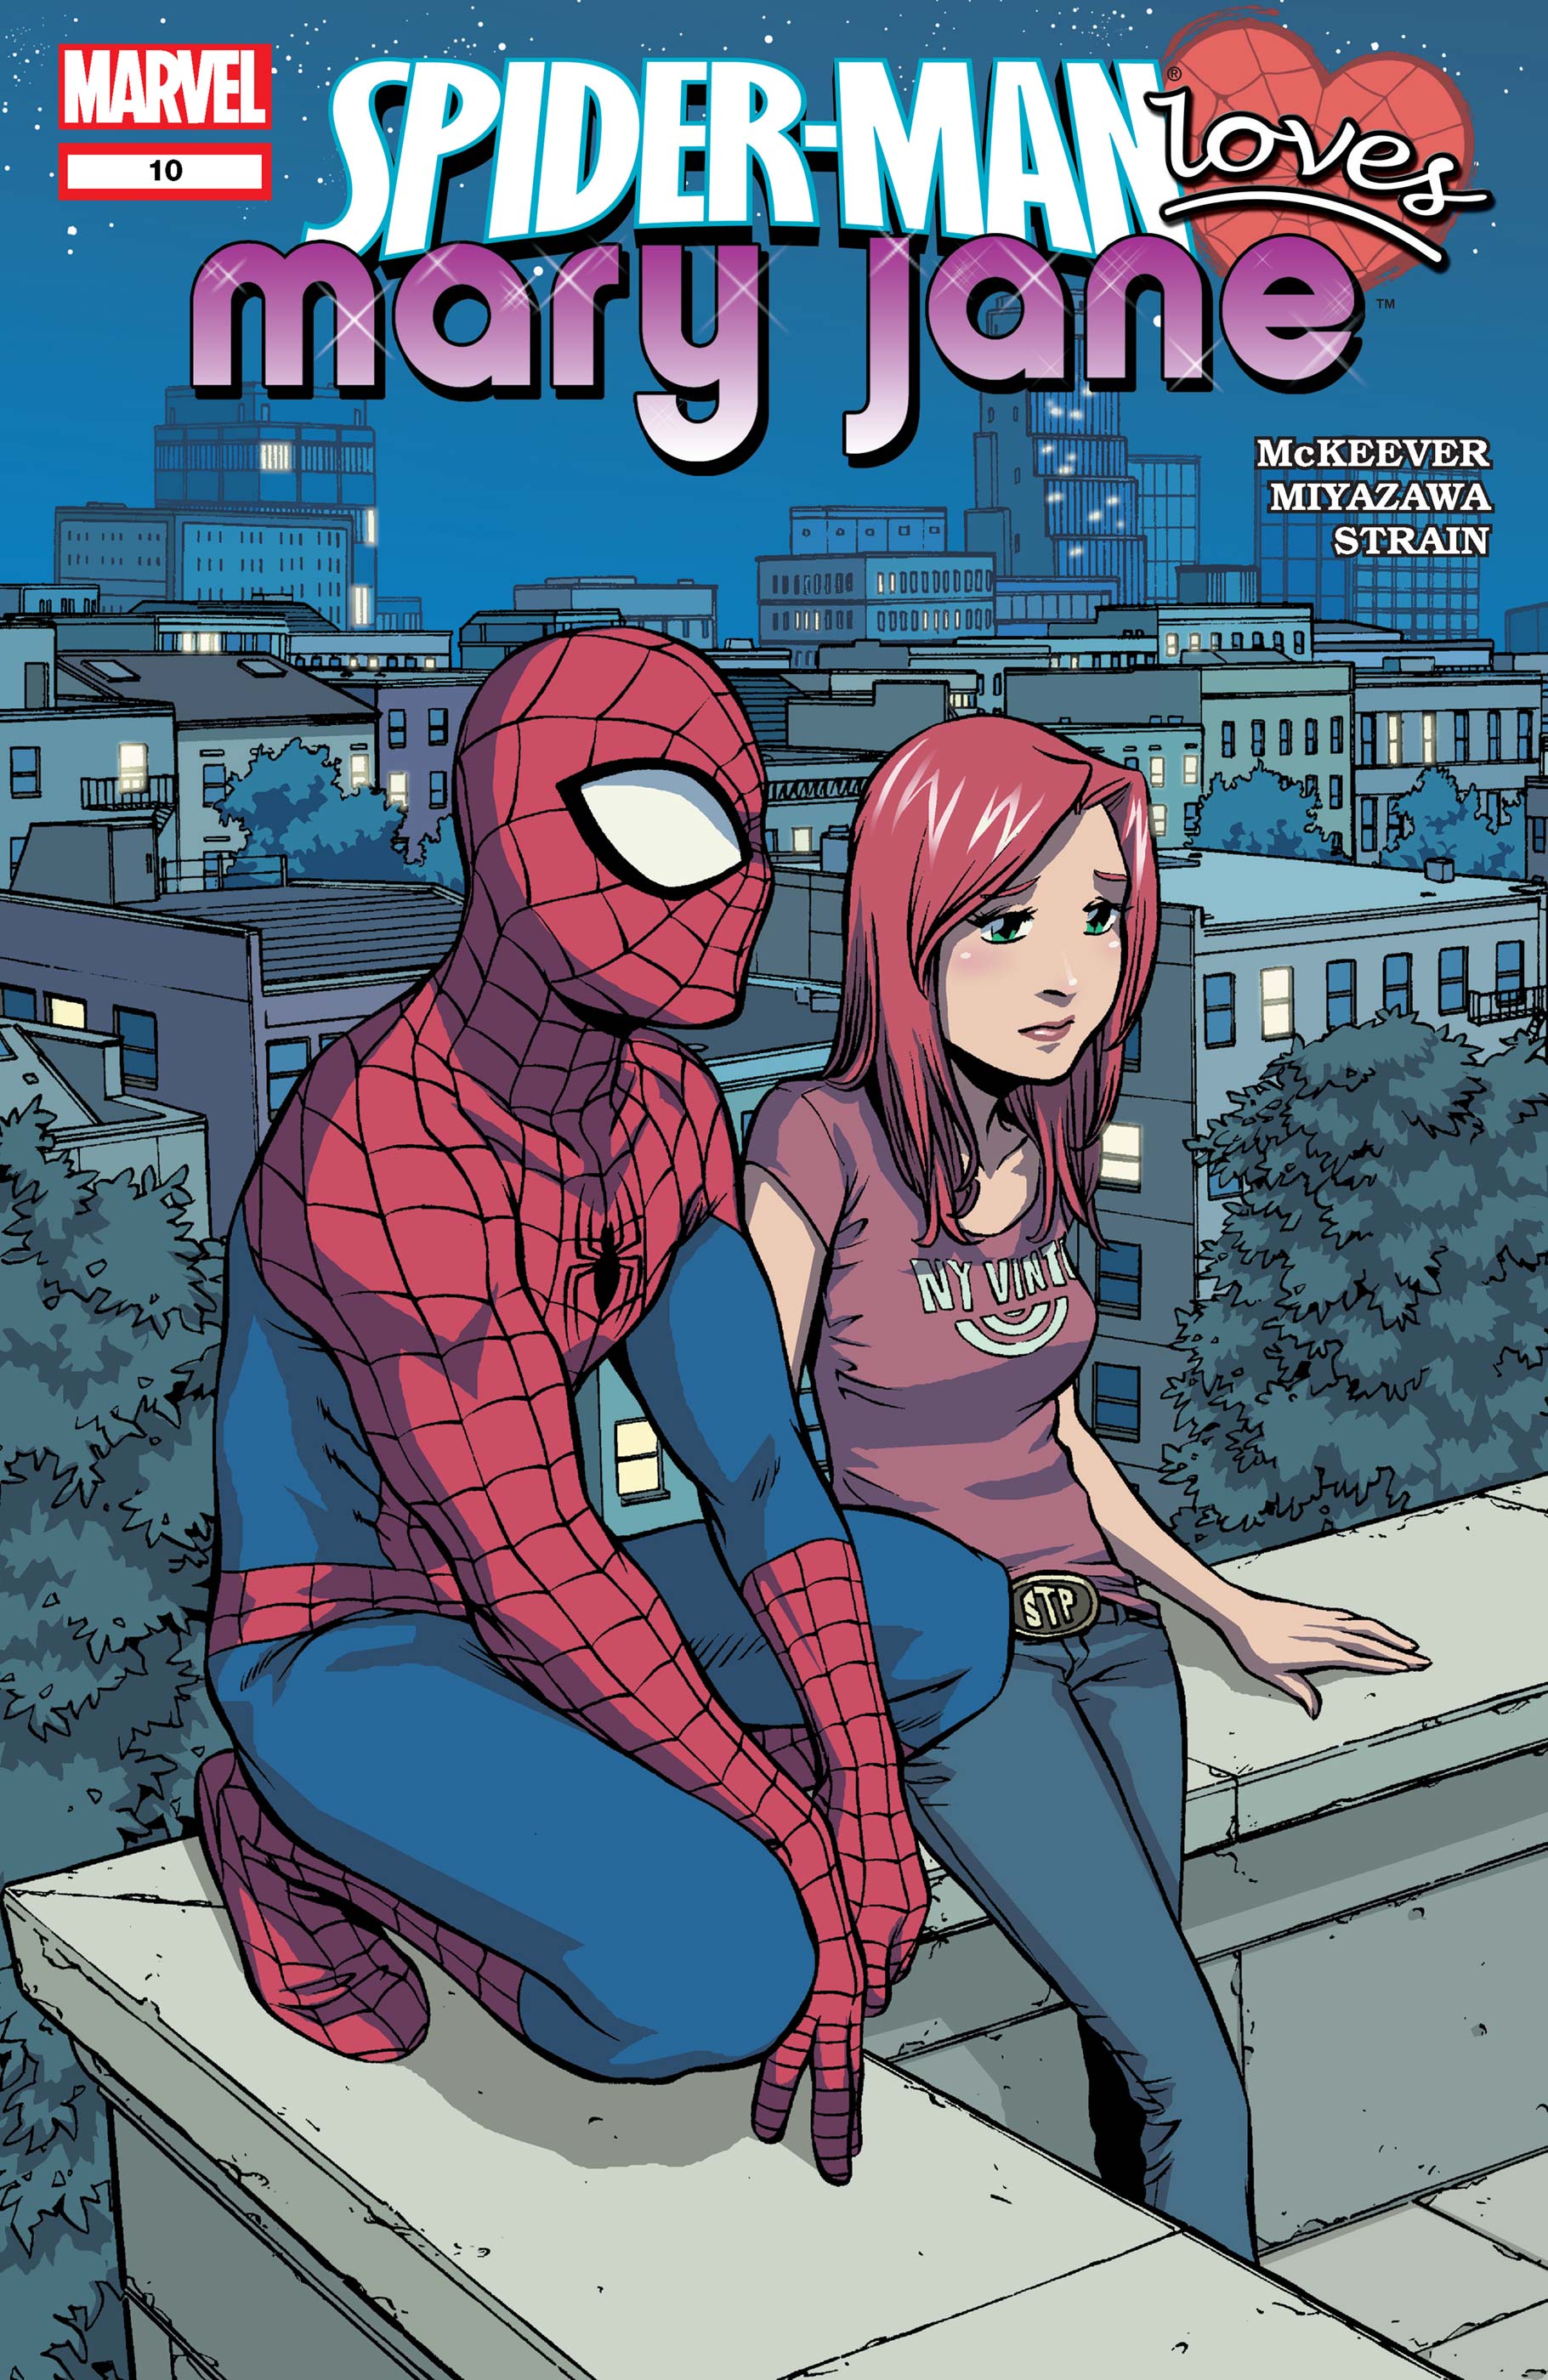 Spider-Man Loves Mary Jane (2005) #10 | Comic Issues | Marvel